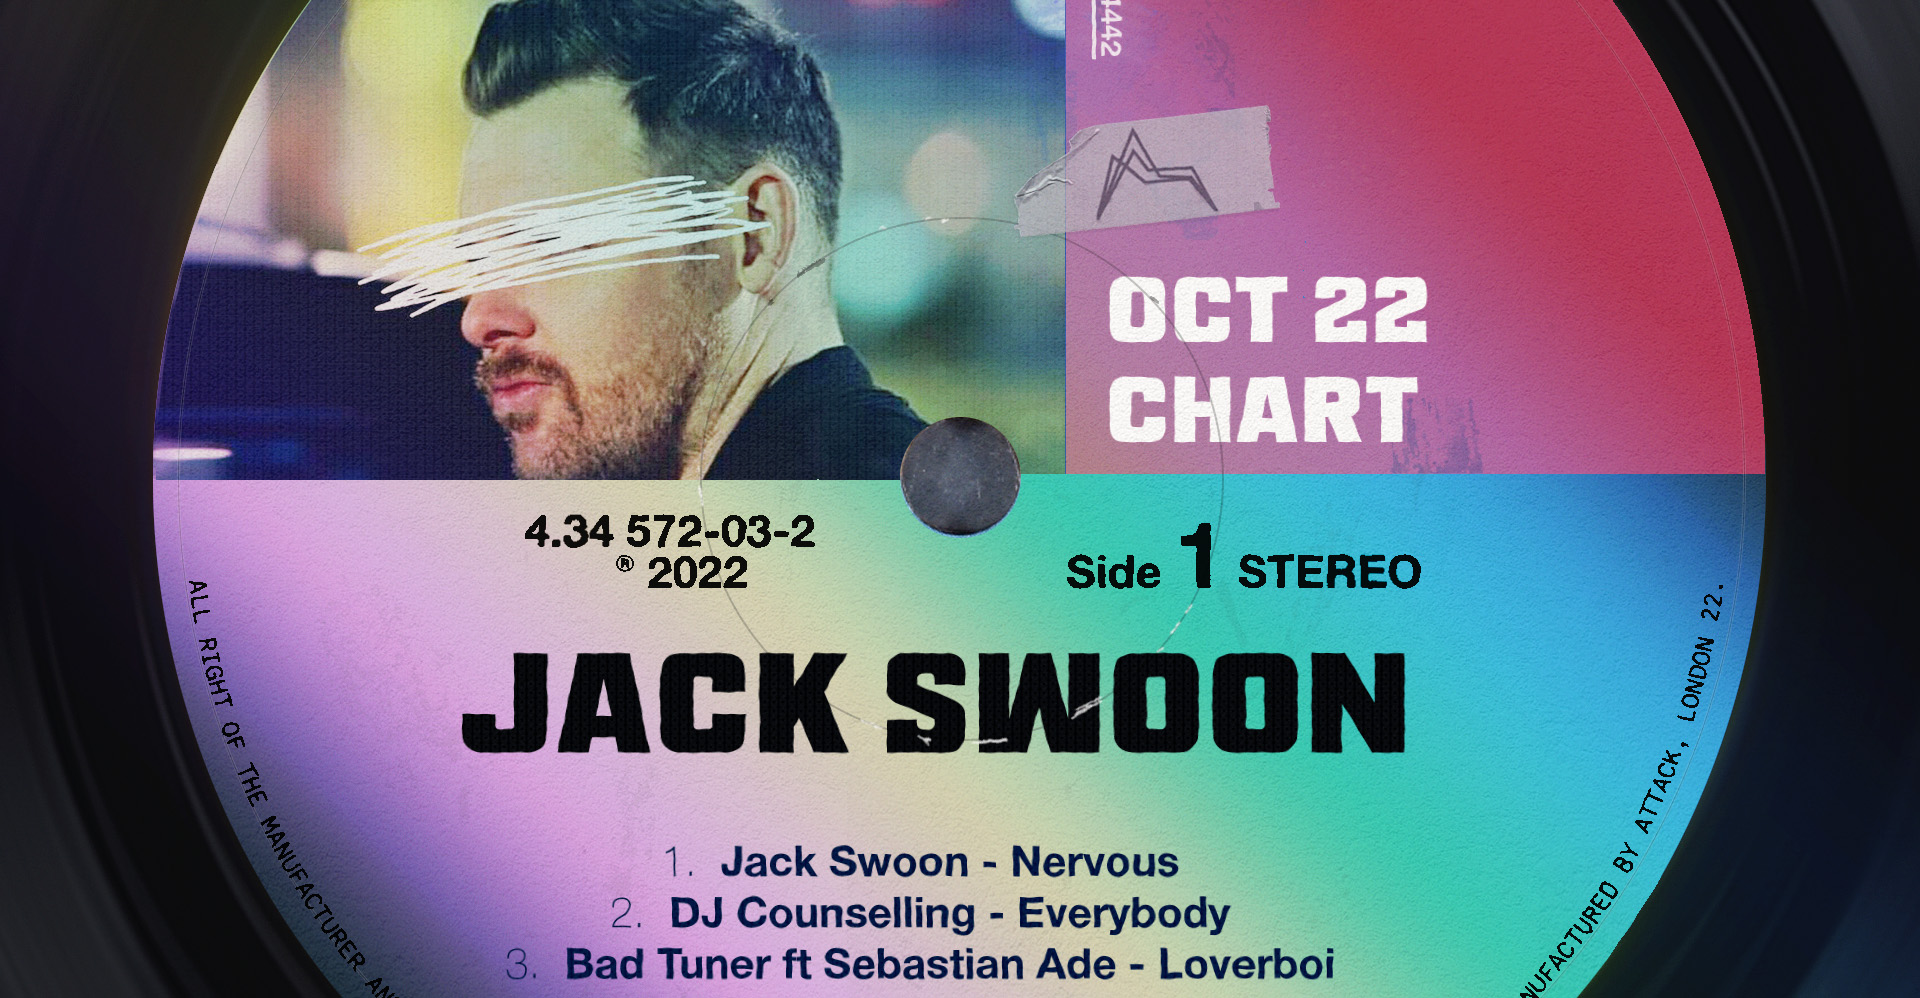 Jack Swoon Oct 22 Chart